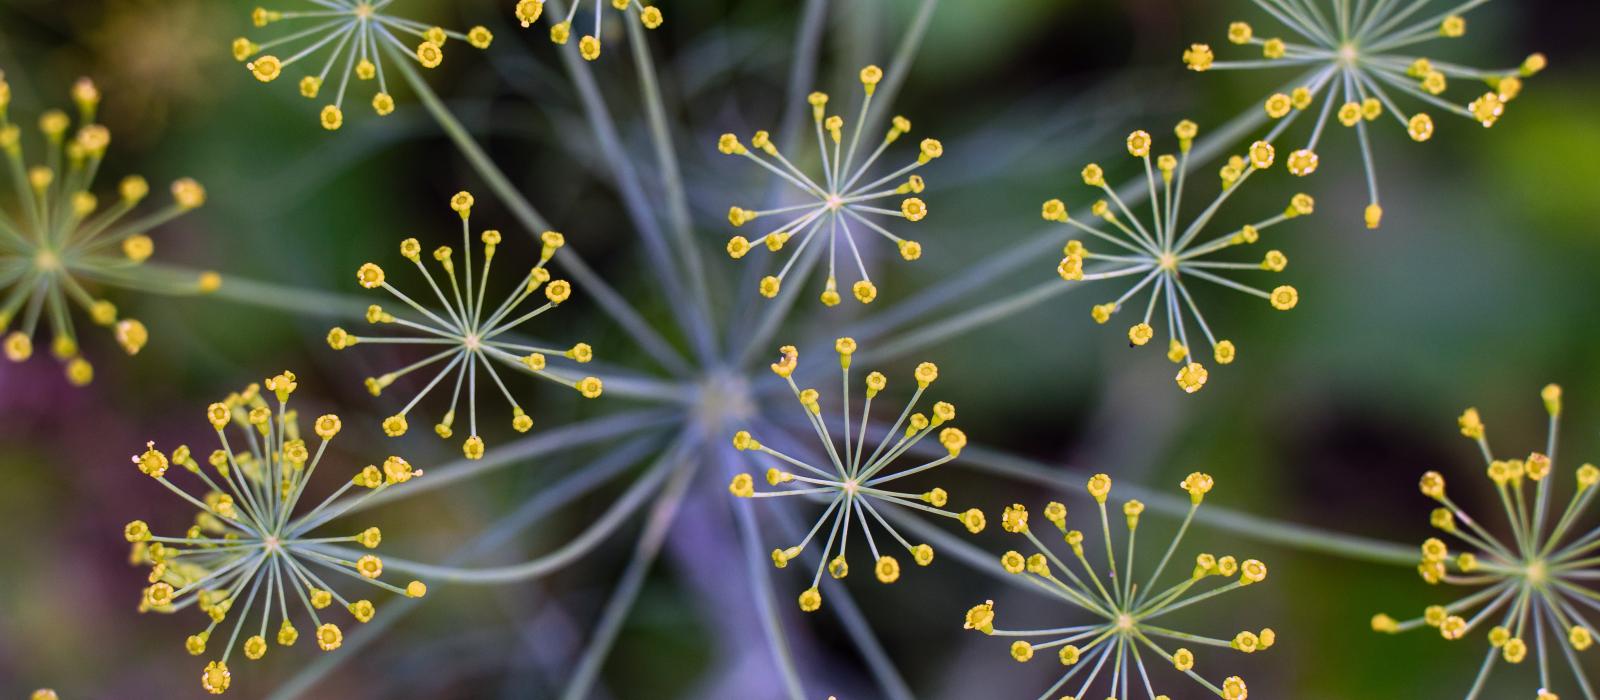 Looking from a bird's eye view, a close-up of small yellow flowers connected radially by a node